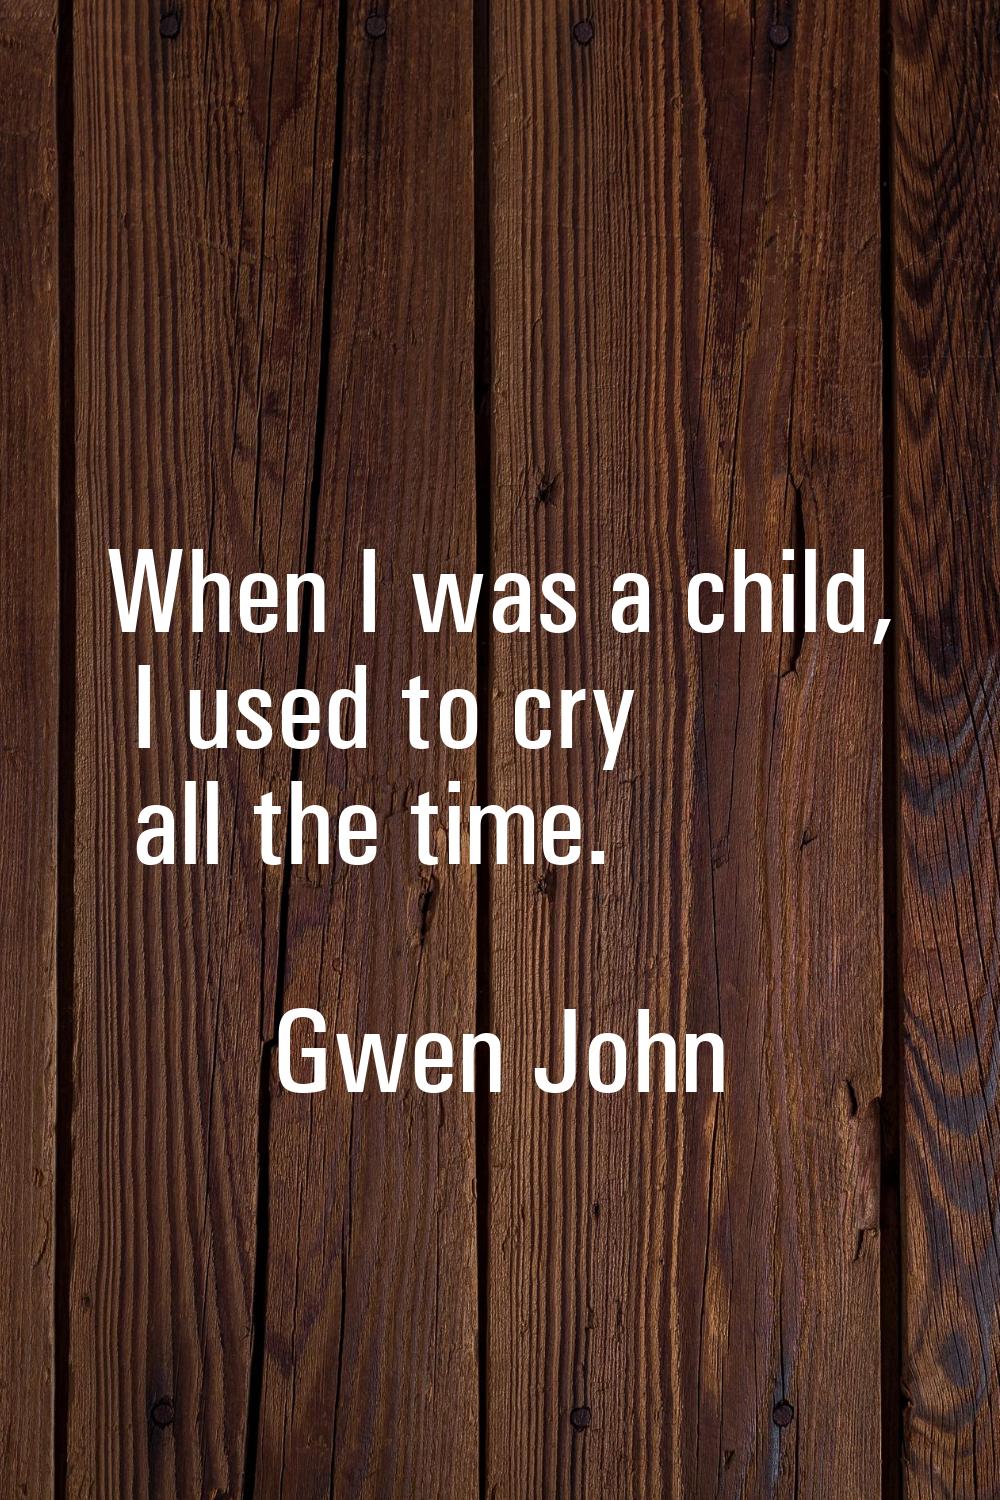 When I was a child, I used to cry all the time.